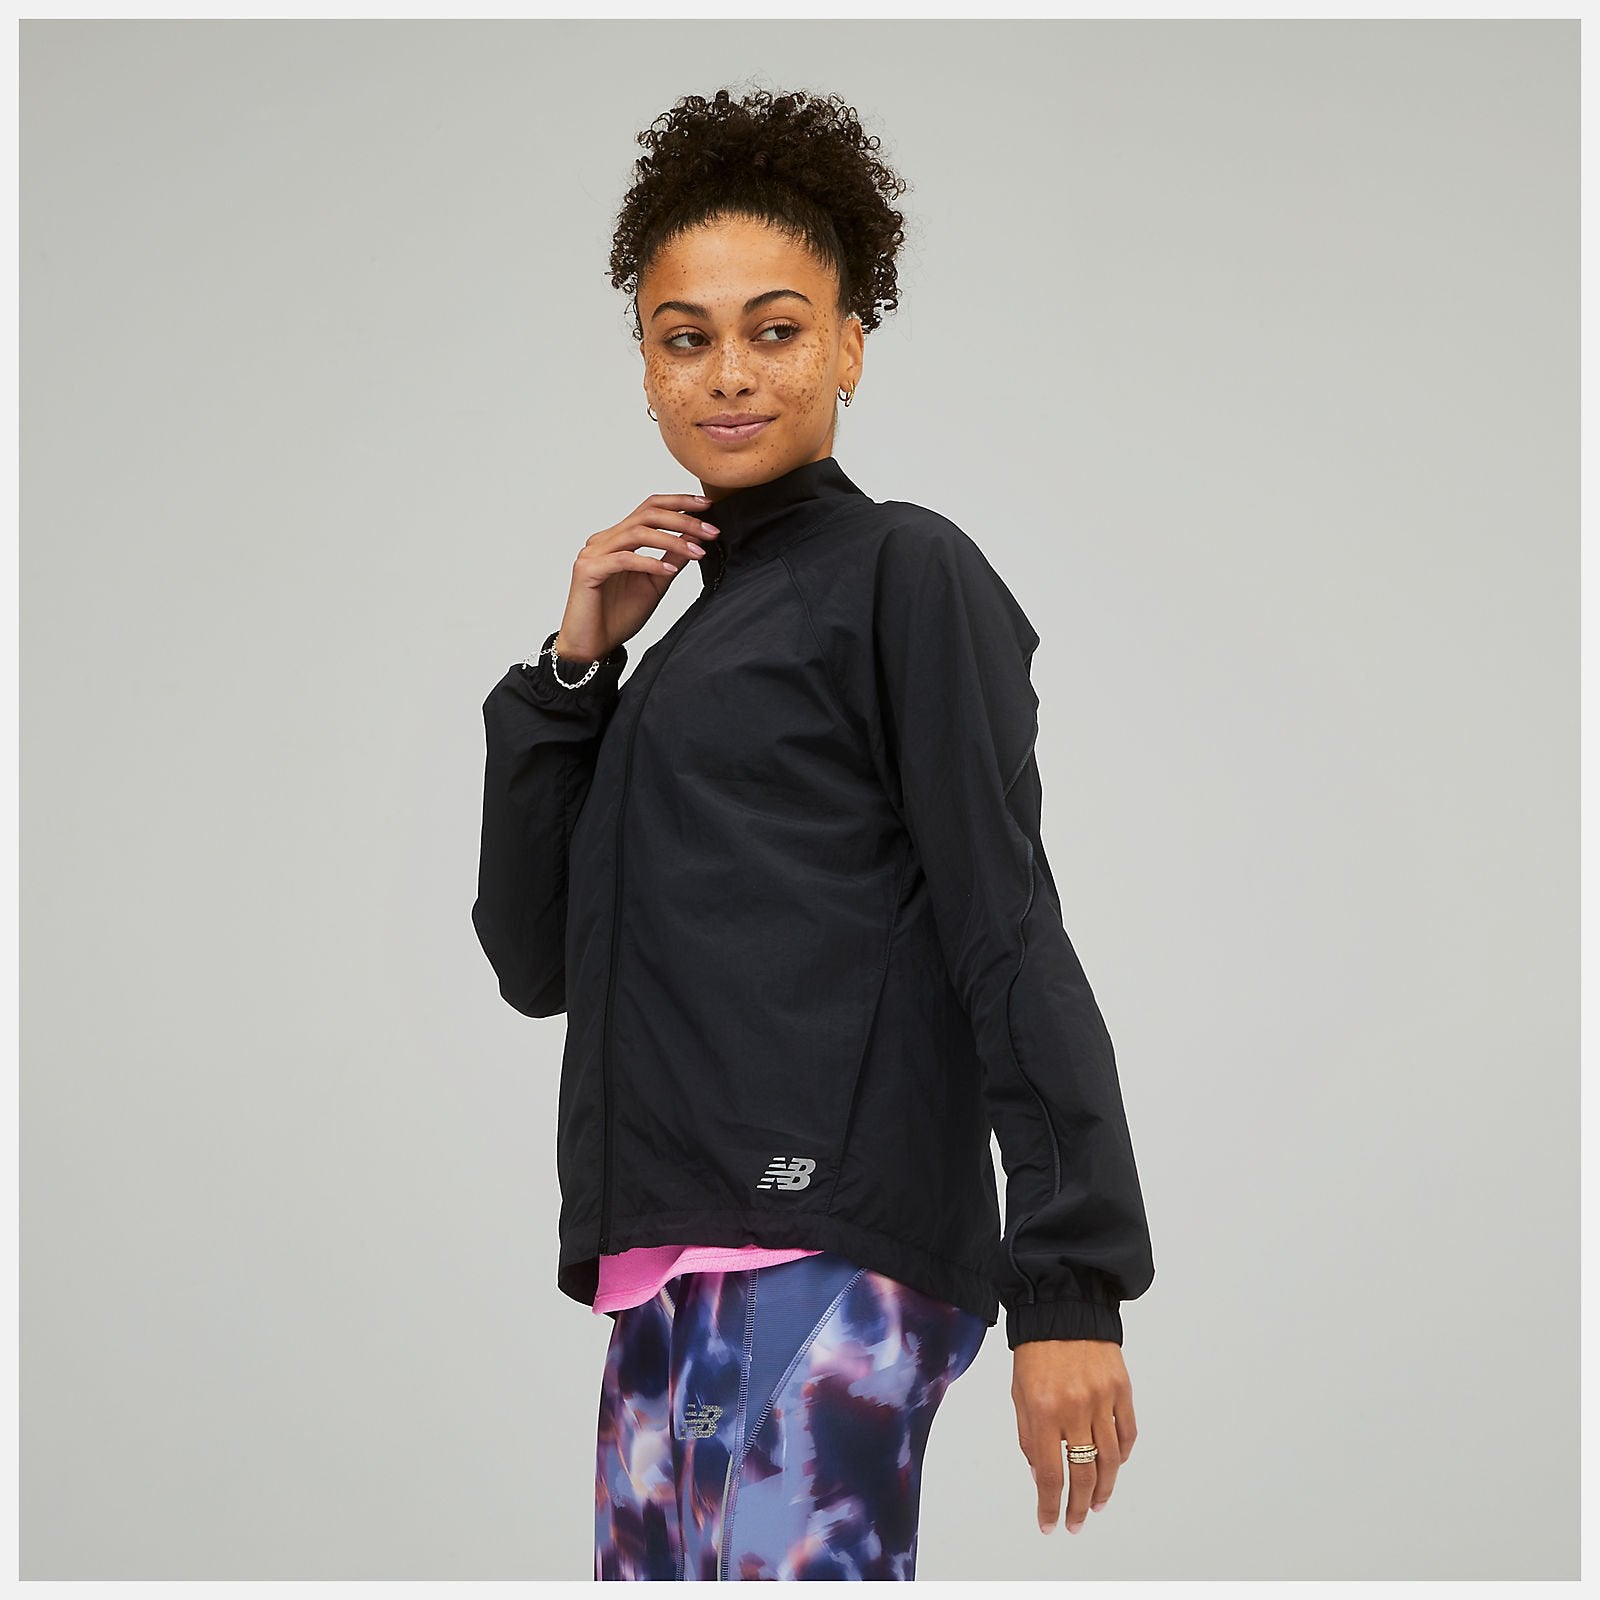 Stay prepared on your run with our Impact Run Jacket. The nylon woven shell features wind and water resistance for protection in unpredictable weather, plus this women's running jacket can be packed up into a waist-pack when conditions heat up. It's finished with reflective branding and piping, designed to catch the light.